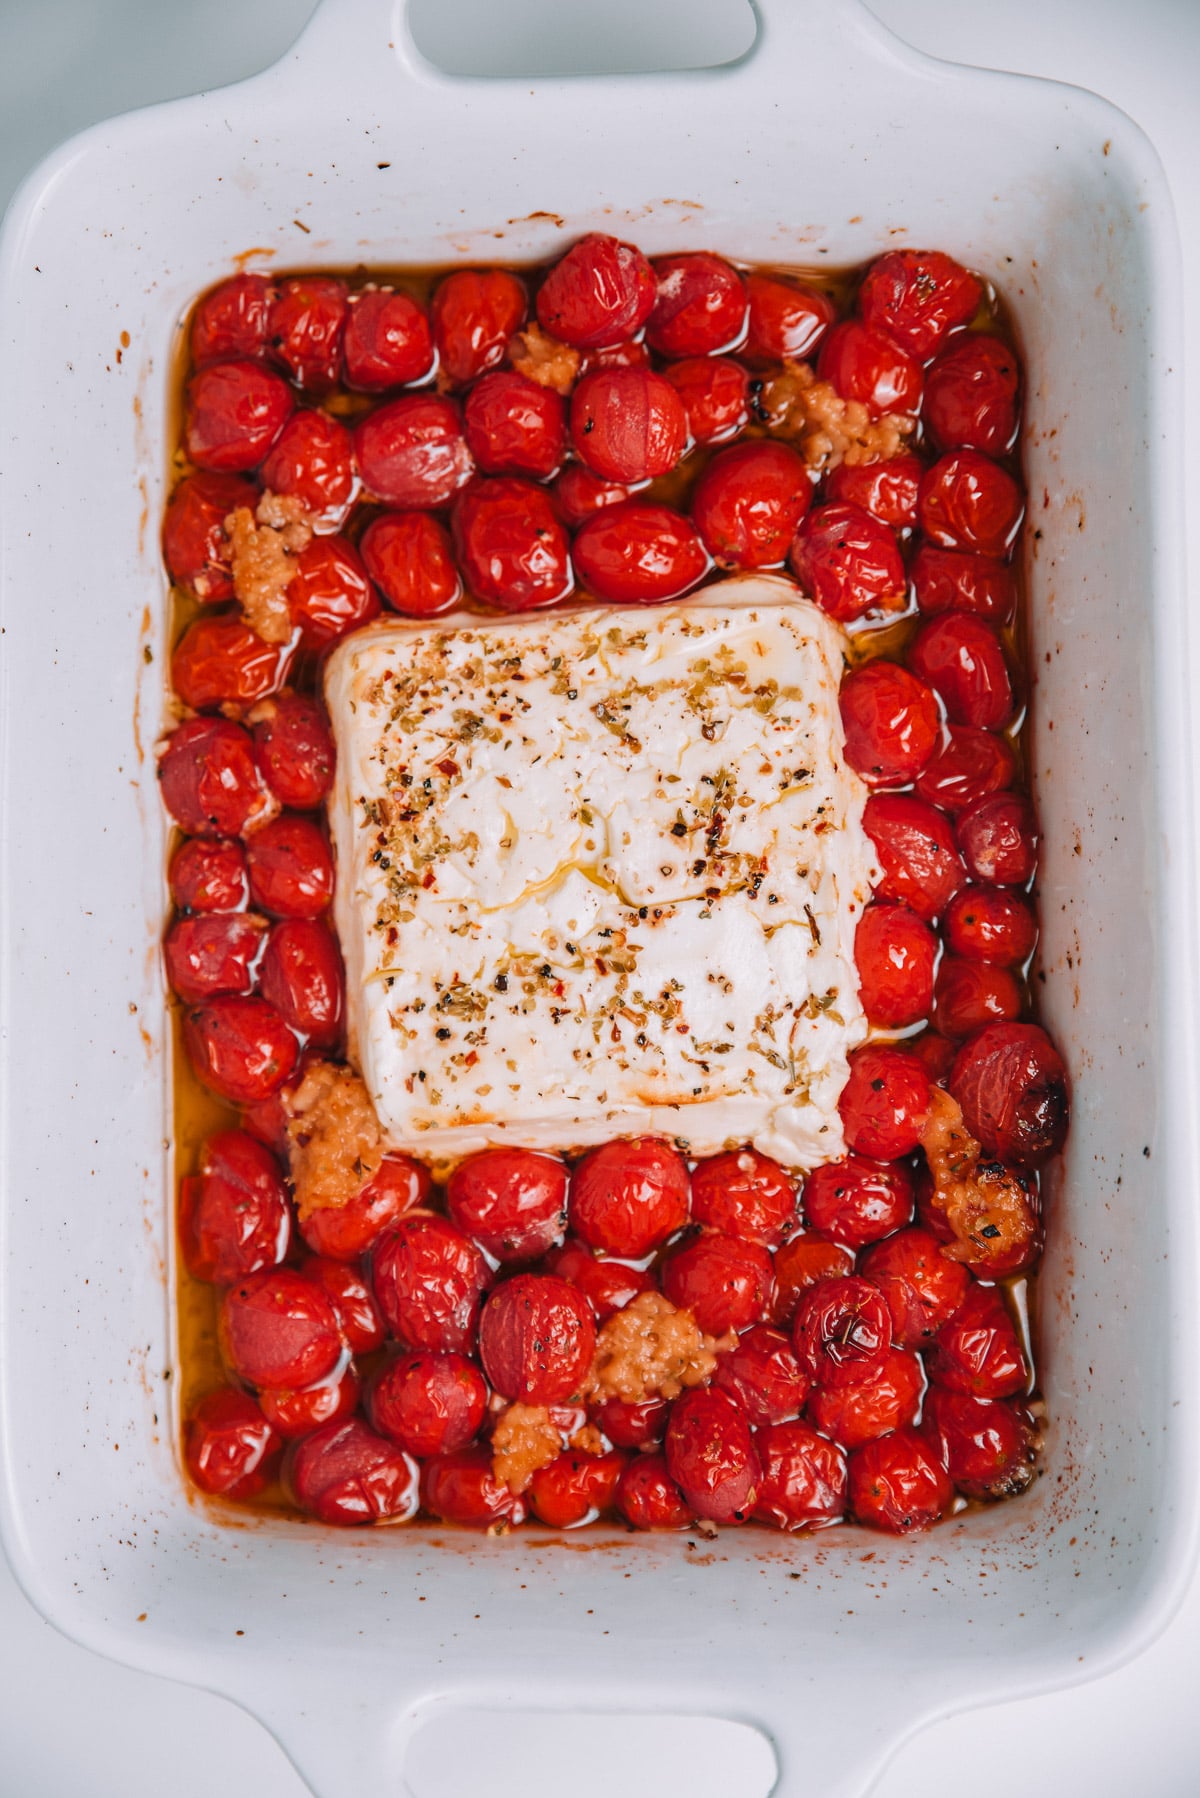 Roasted cherry tomatoes with garlic and melted feta cheese with seasonings